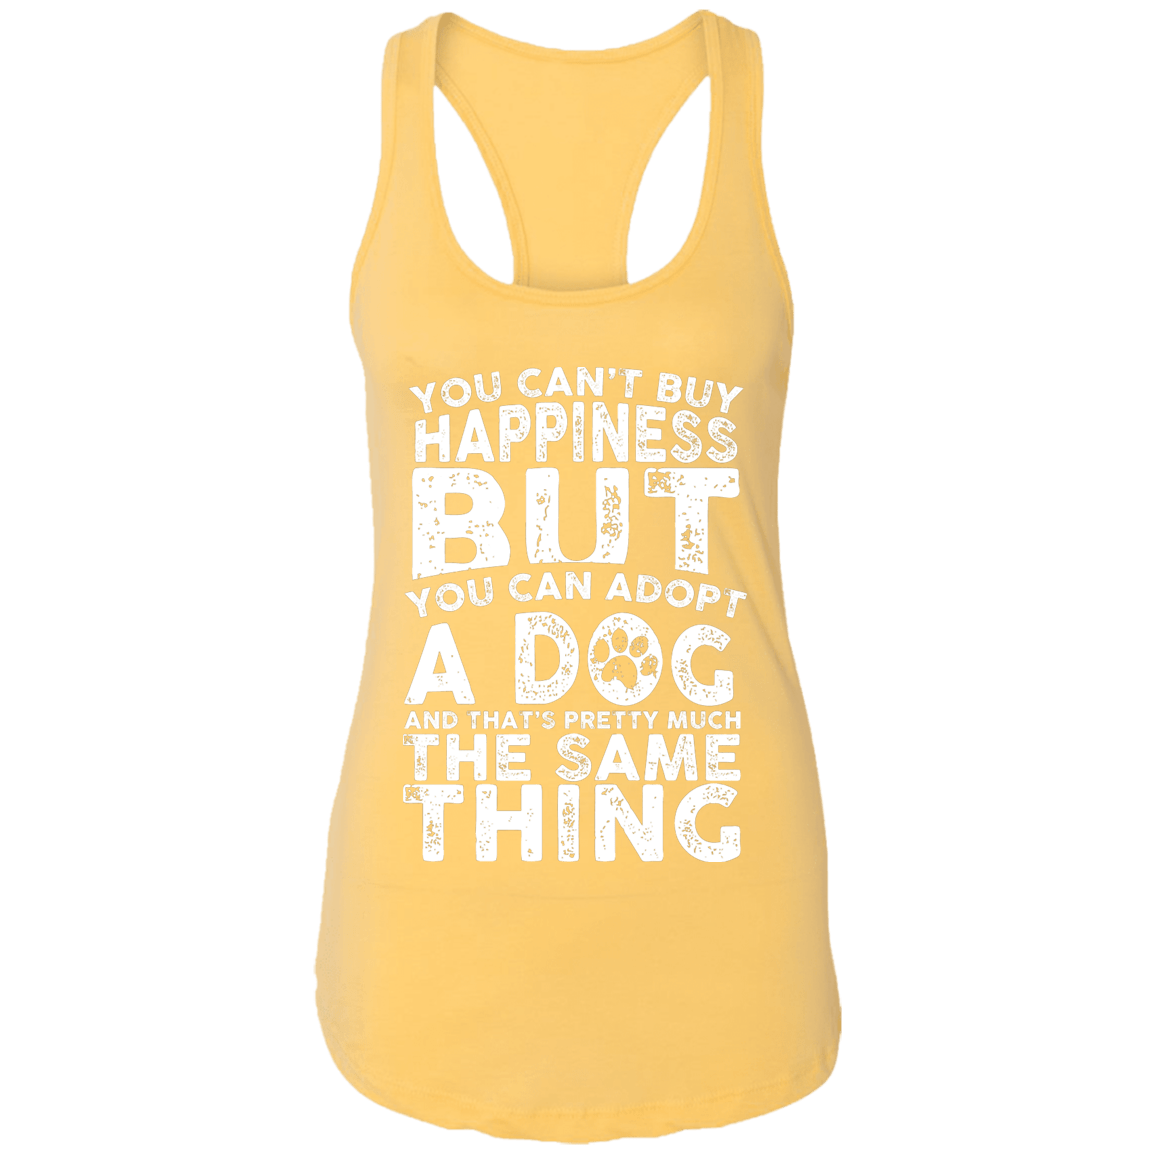 You Can't Buy Happiness - Ladies Racer Back Tank.